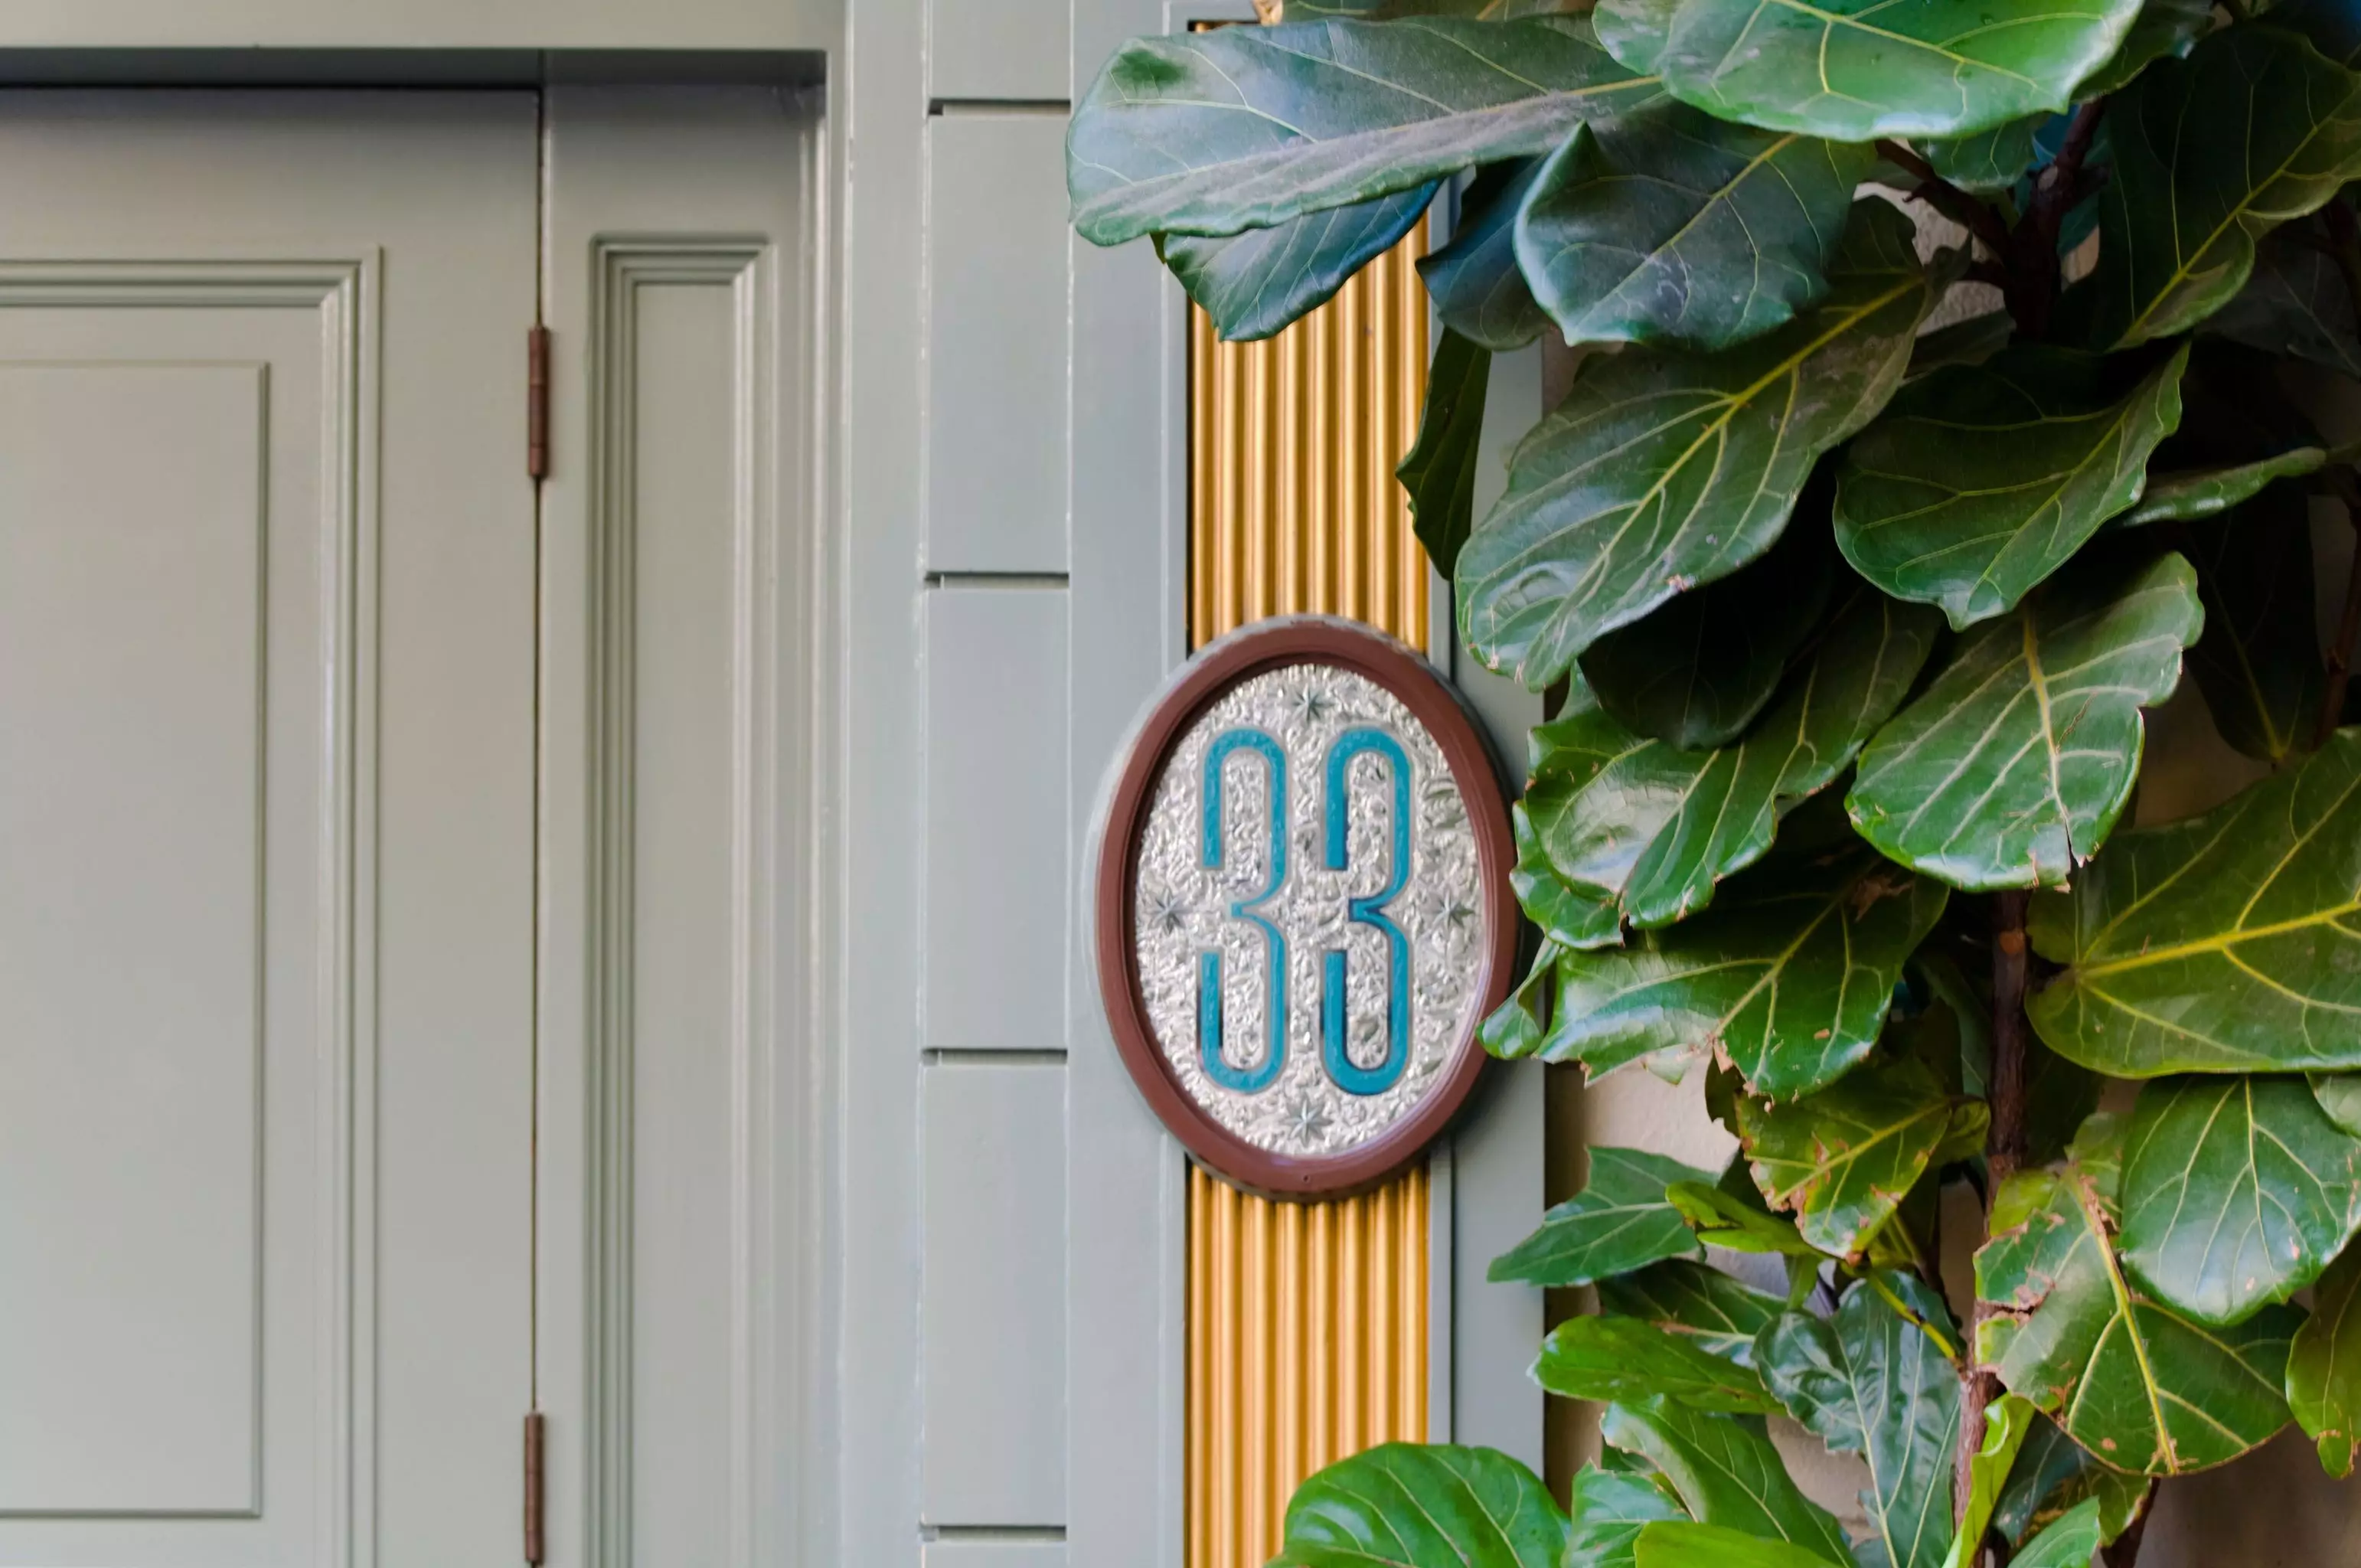 The entrance of the renowned Club 33.